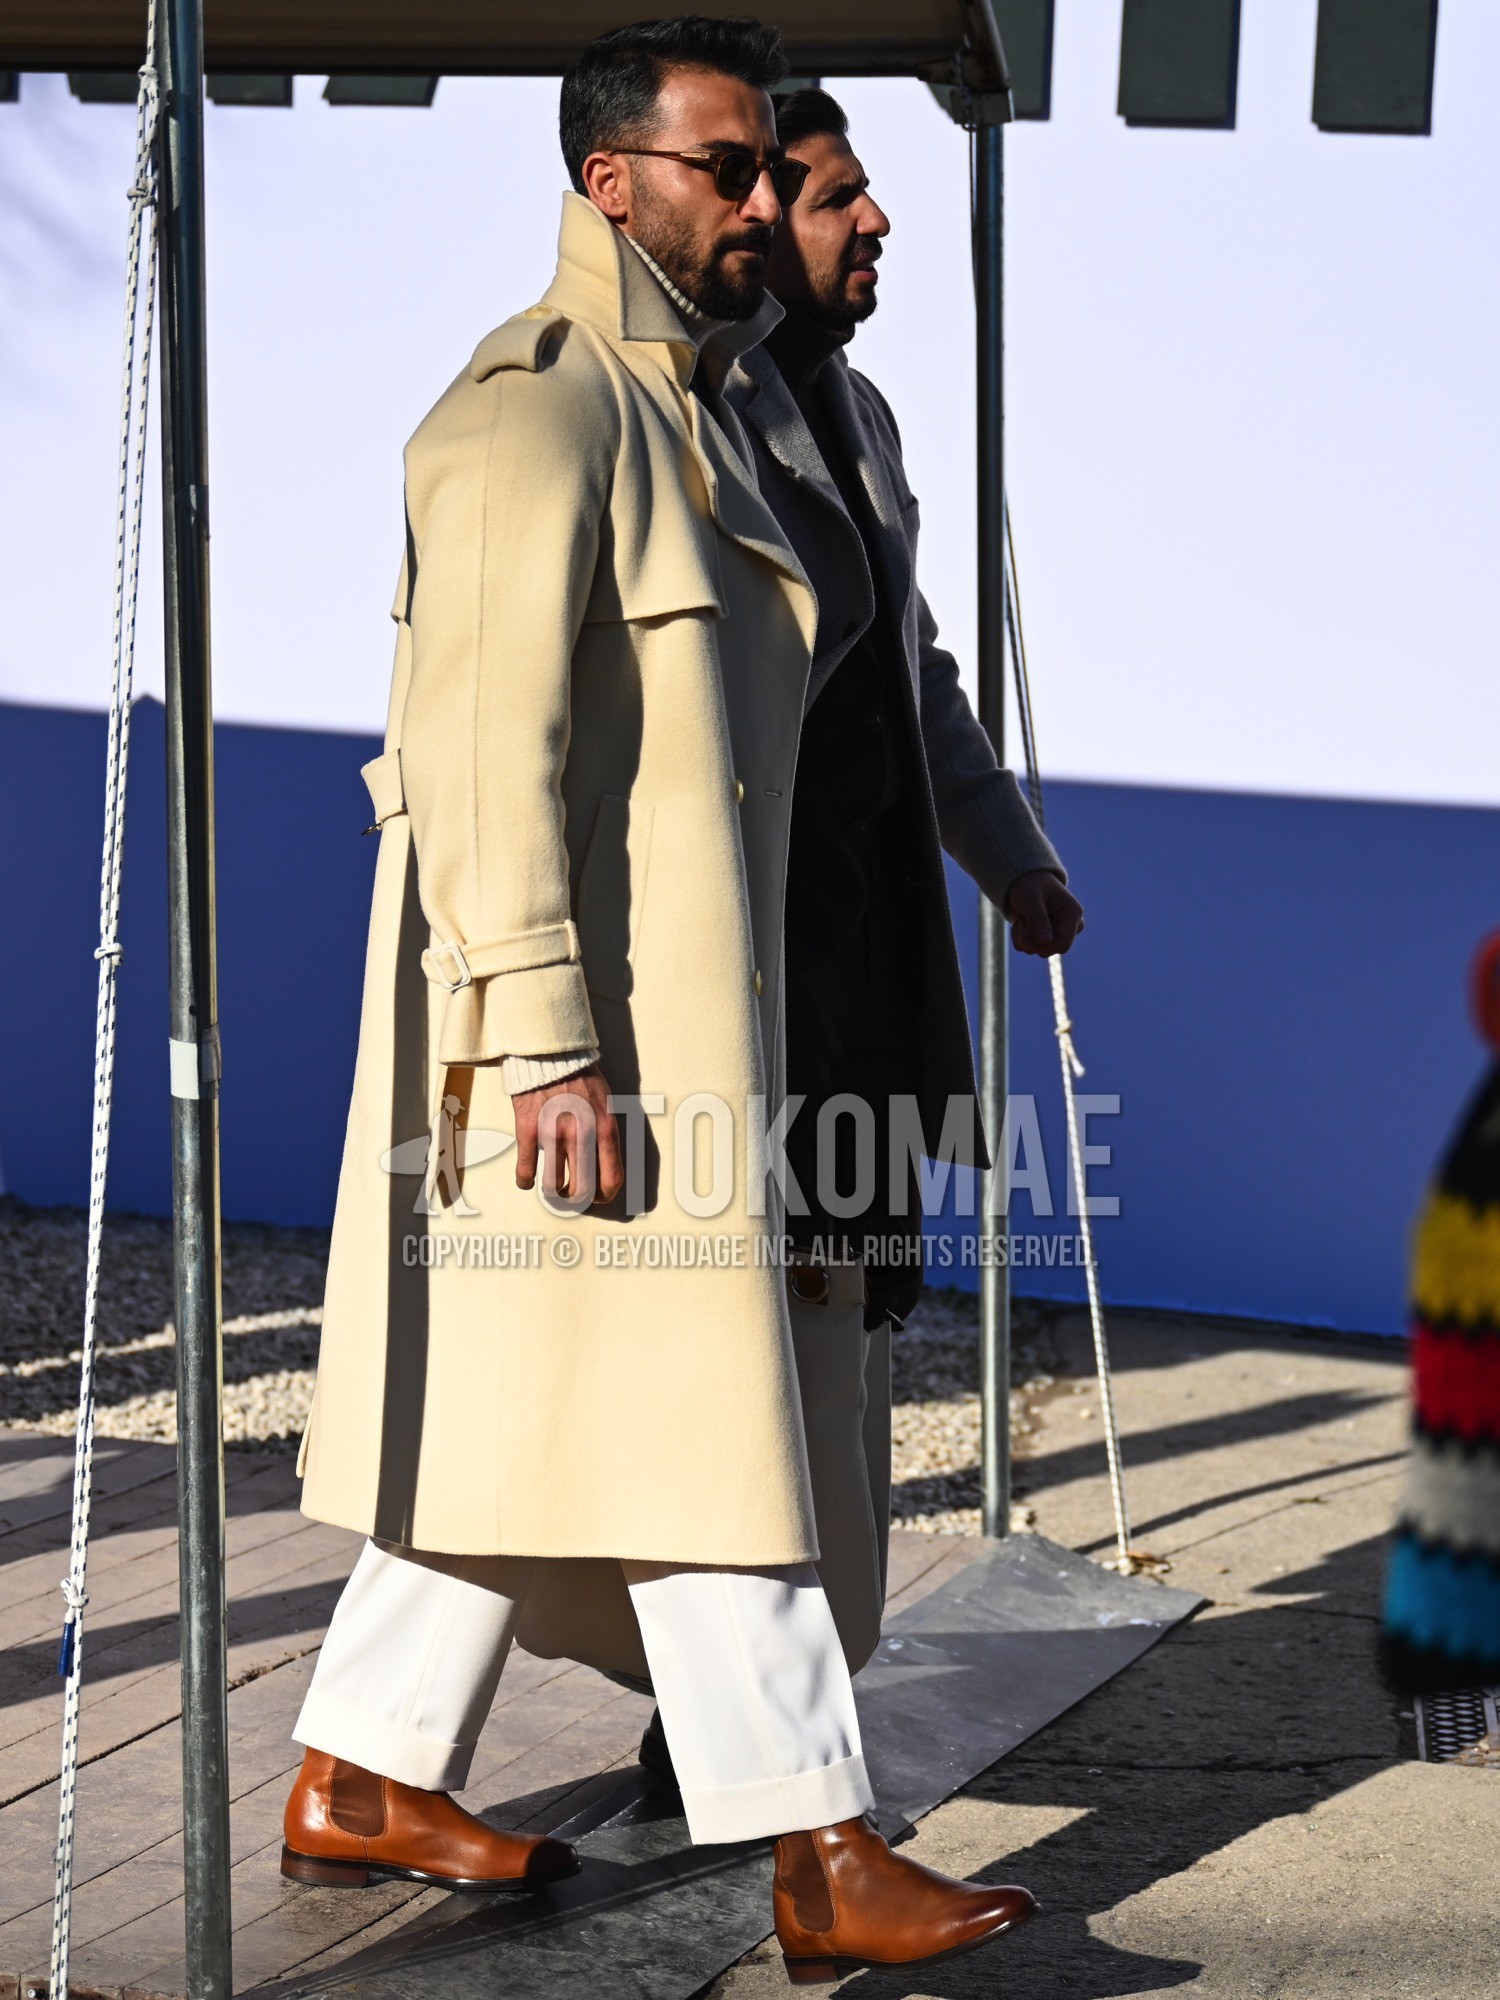 Men's autumn winter outfit with brown tortoiseshell sunglasses, beige plain trench coat, white plain turtleneck knit, white plain slacks, brown side-gore boots.